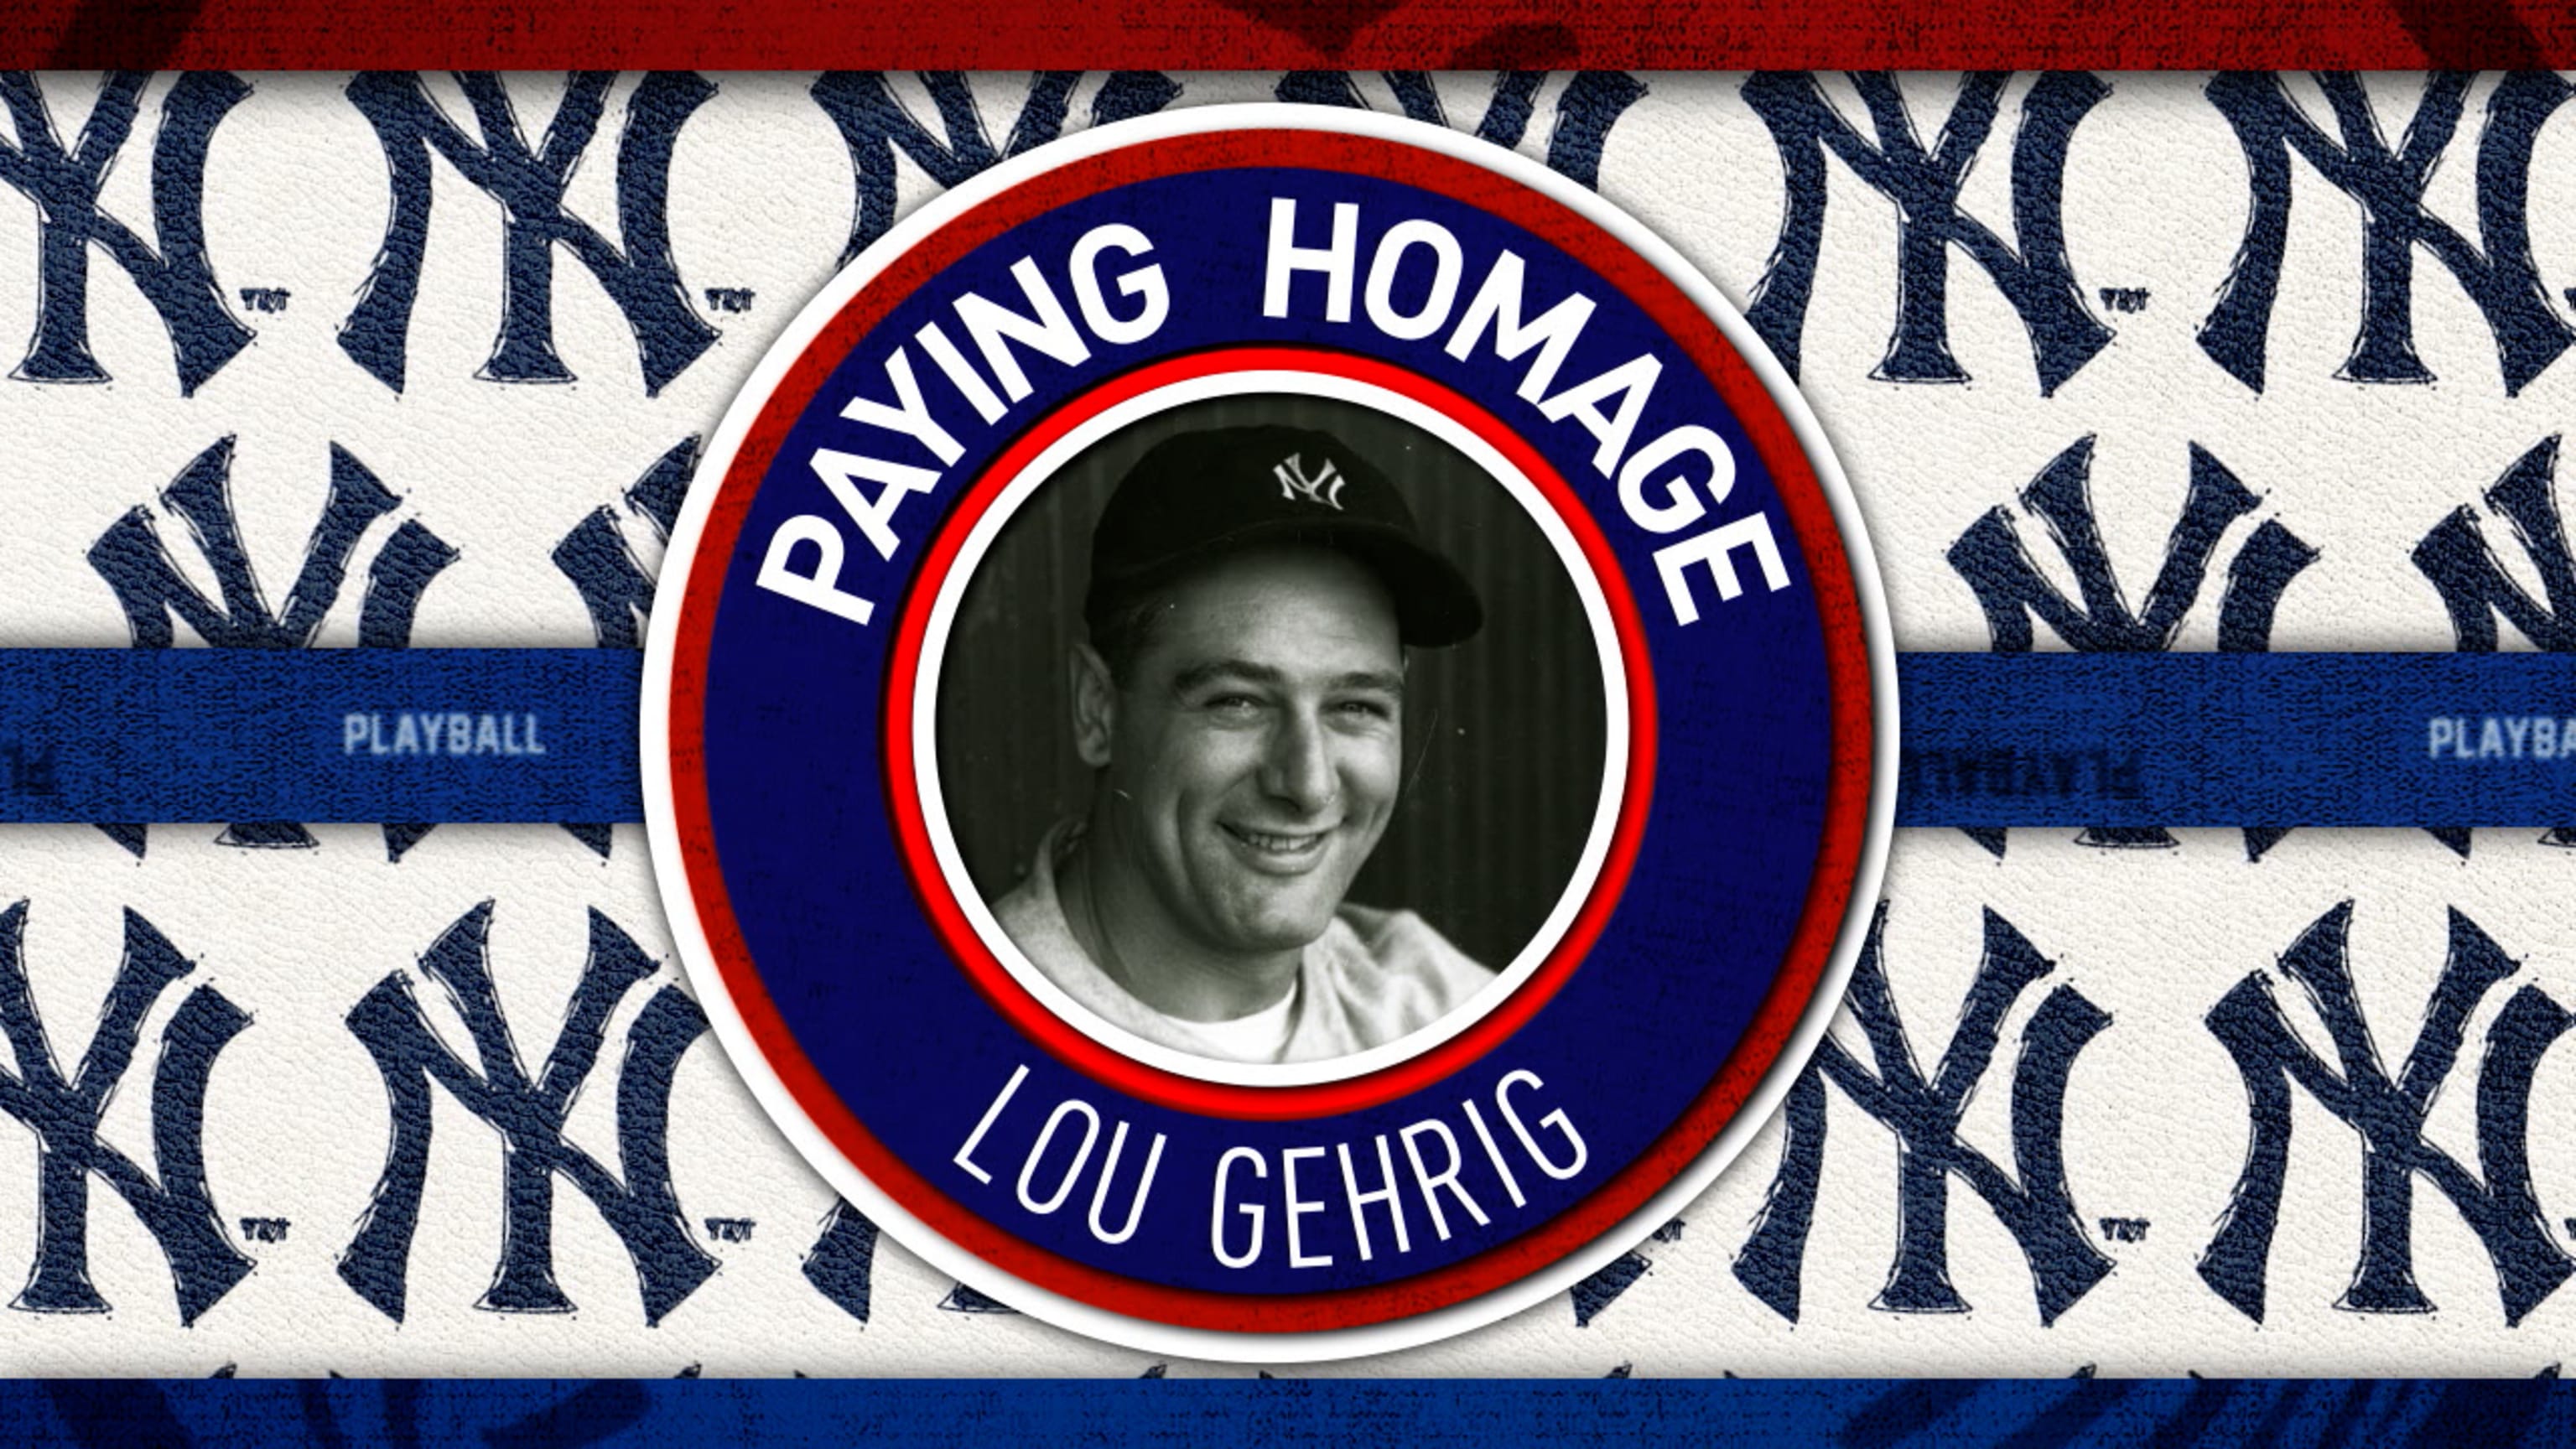 With help from Lou Gehrig, MLB launches into NFT space